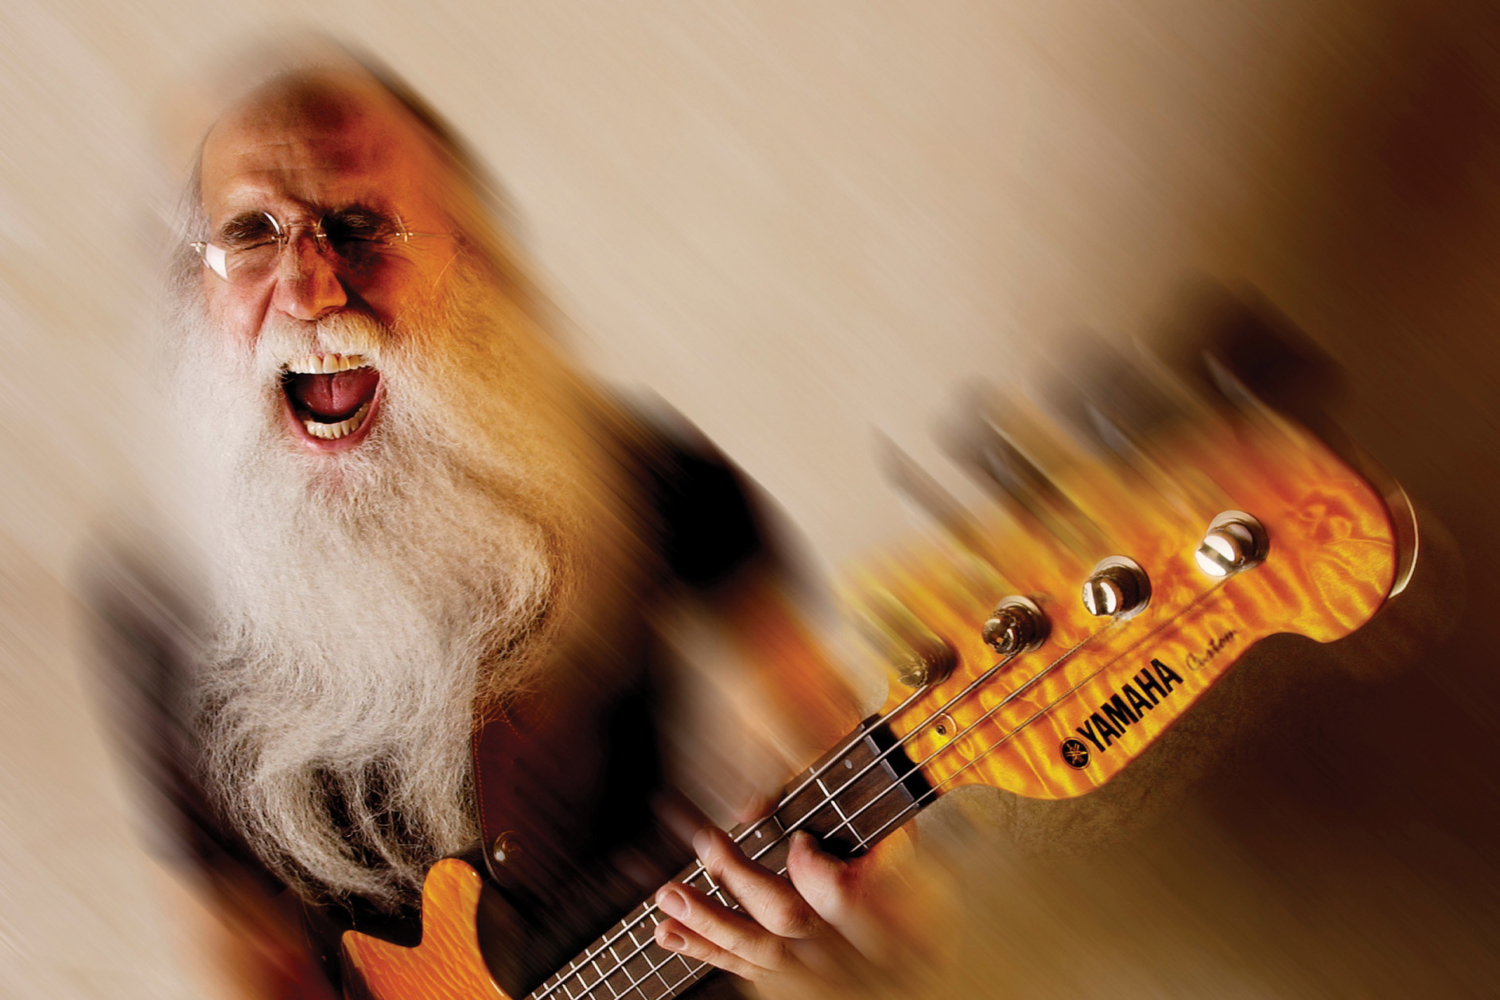 The GRAMMY Museum Presents “An Evening With Leland Sklar” No Treble